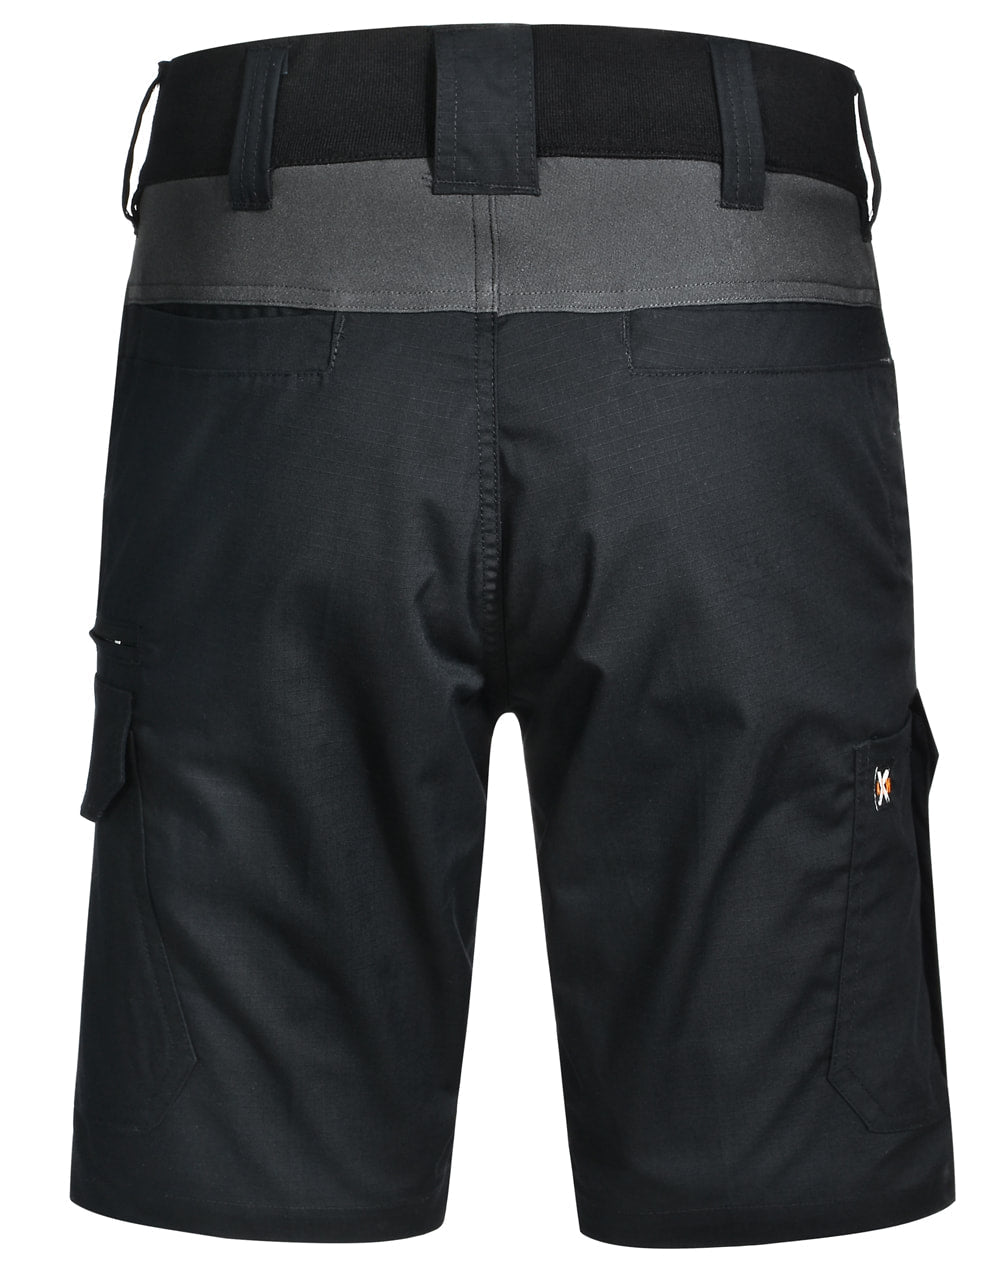 AIW WP25 UNISEX RIPSTOP STRETCH WORK SHORTS